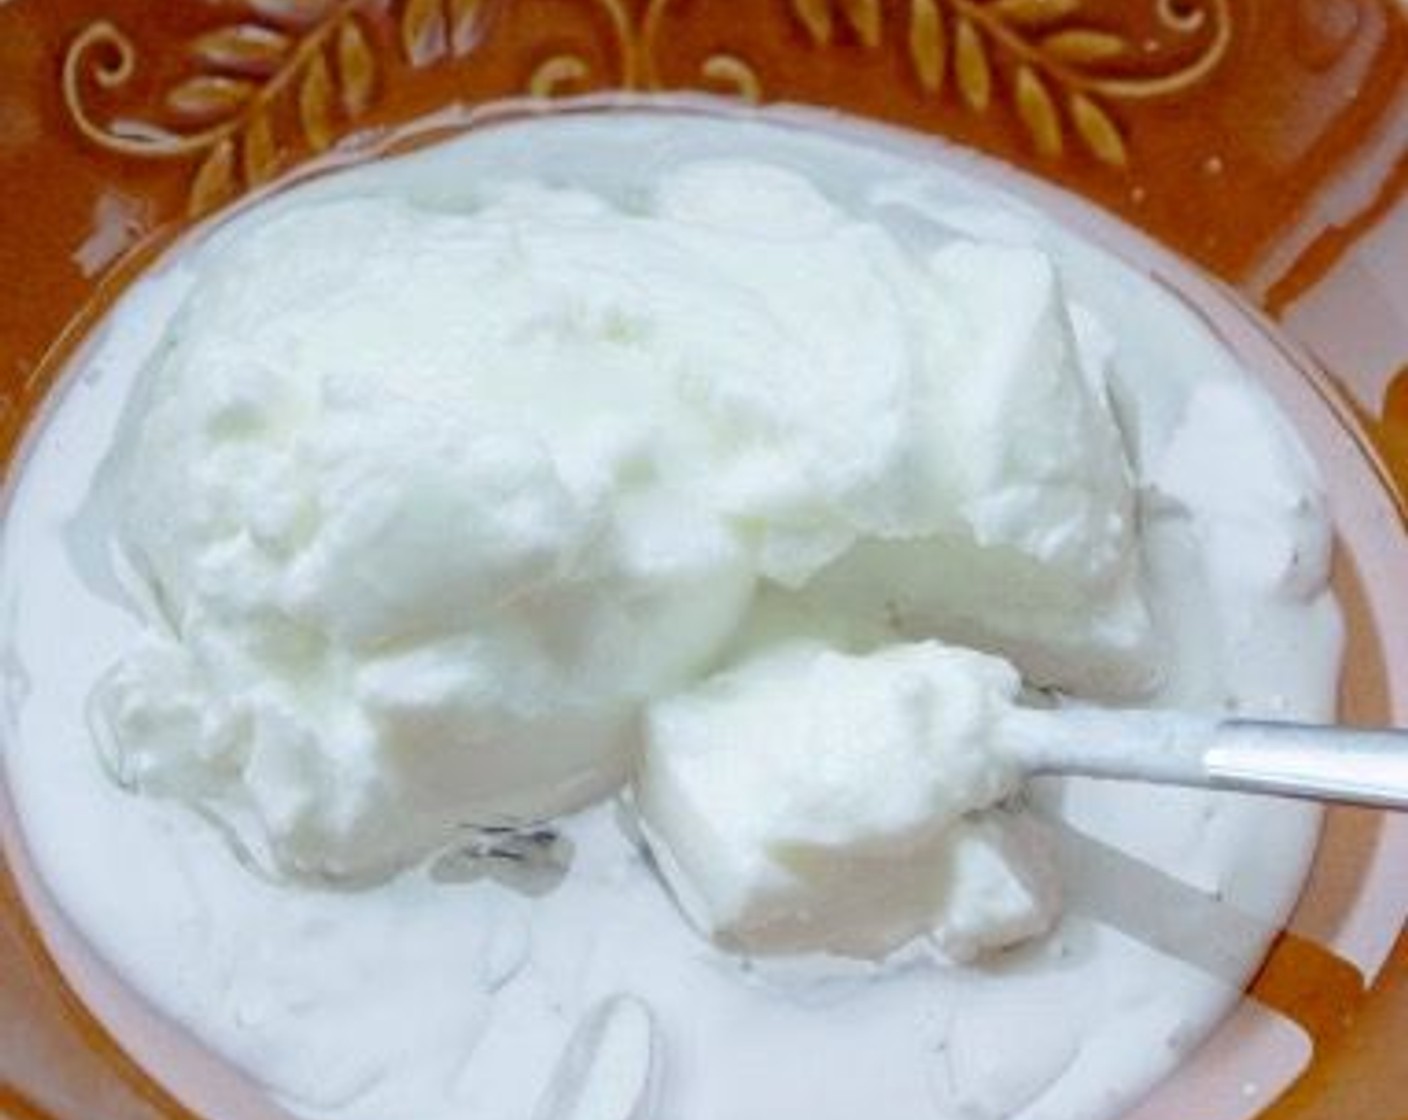 step 3 In another bowl, combine the Coconut Oil (1/2 cup), Greek Yogurt (1/2 cup), and Coconut Cream (1/3 cup).